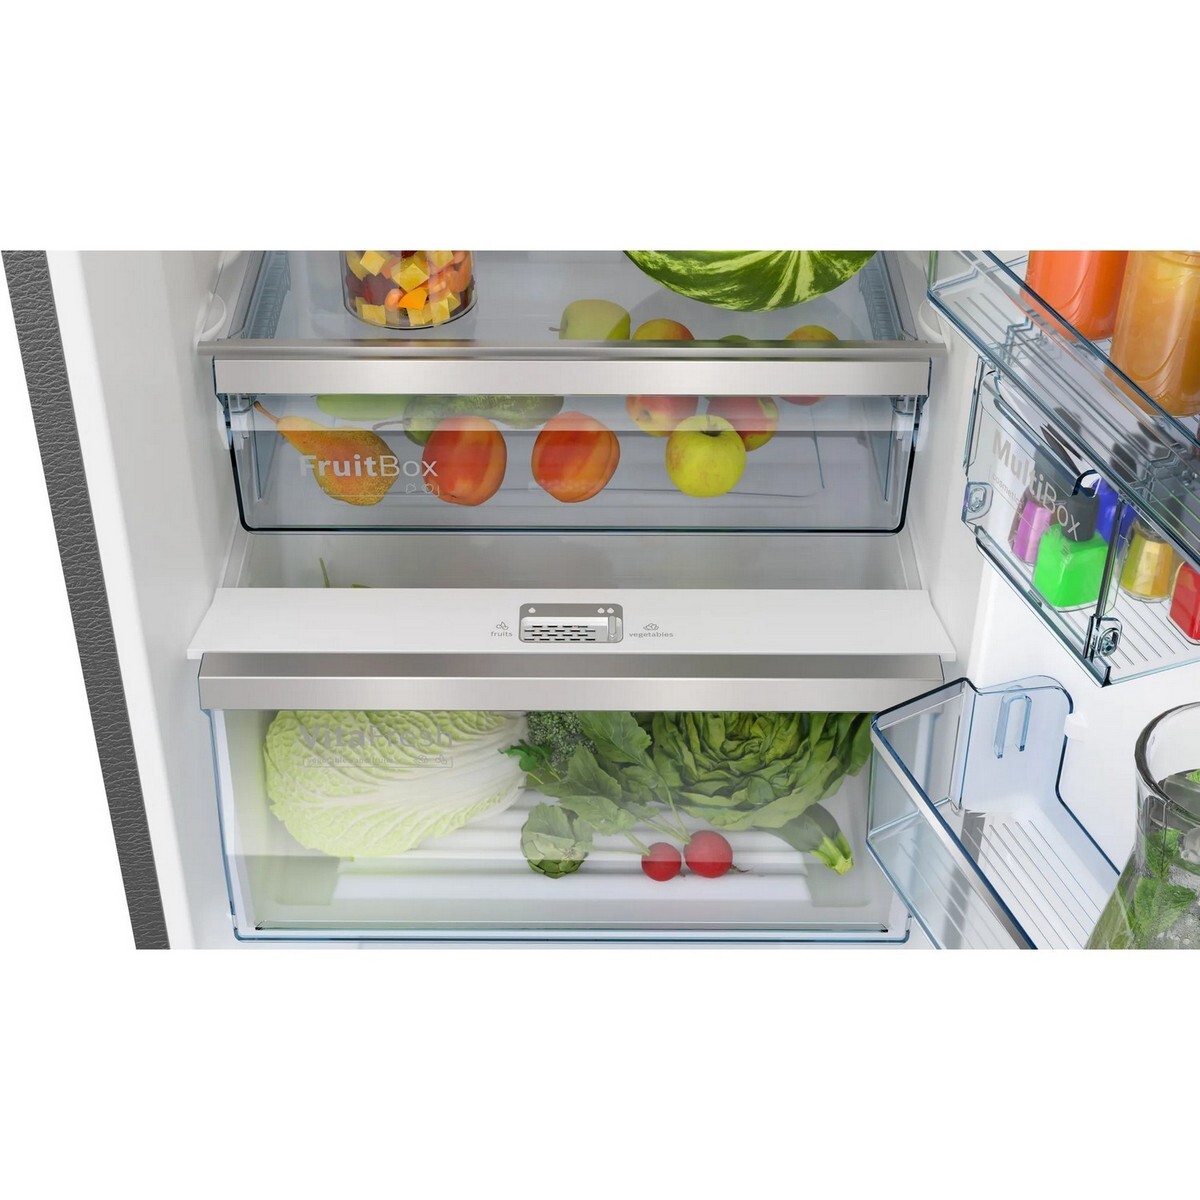 Bosch Frost Free Double Door Refrigerator CTC39S03NI 368L Shiny Silver